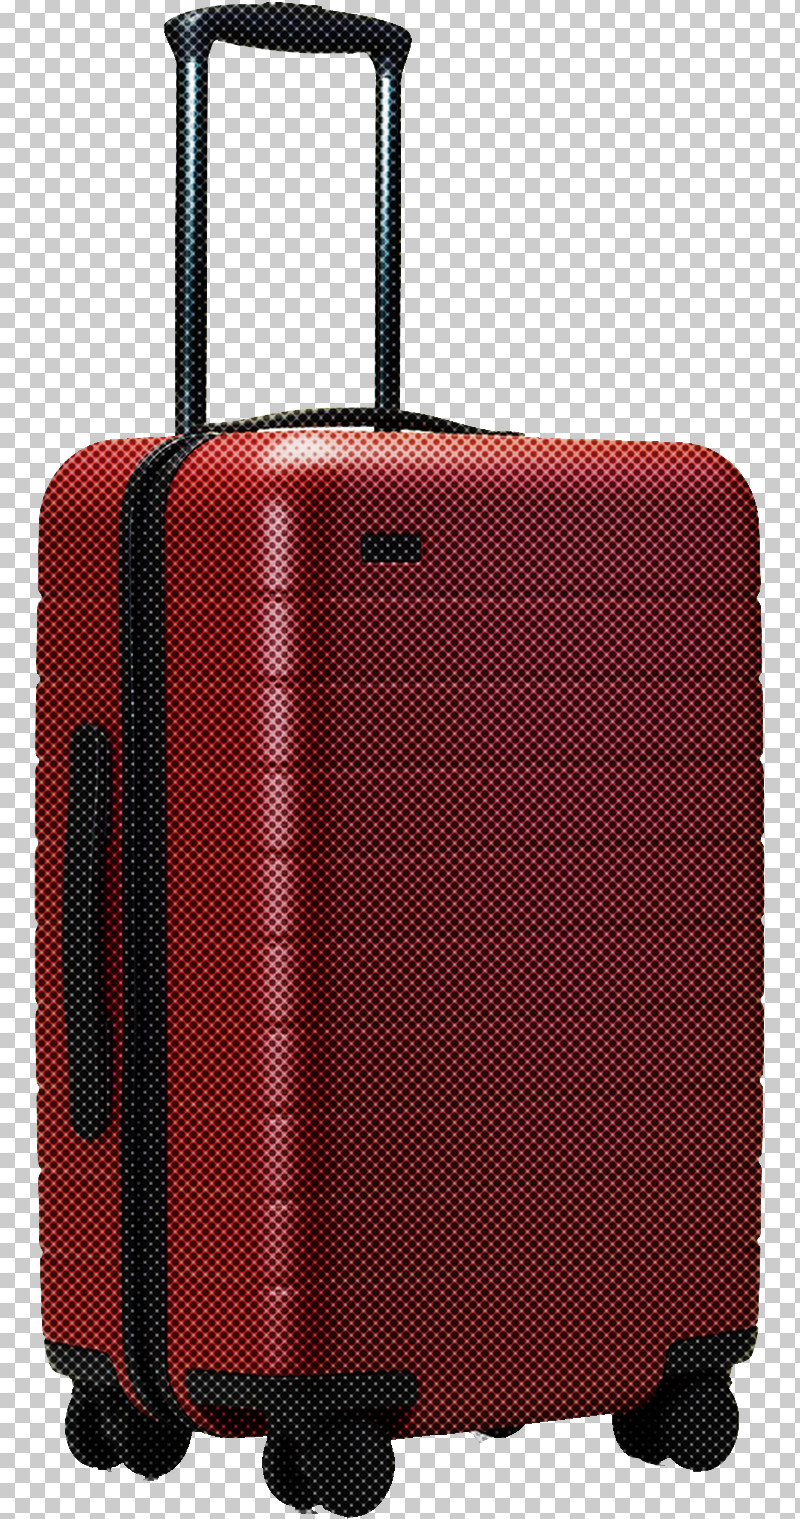 Suitcase Hand Luggage Red Baggage Luggage And Bags PNG, Clipart, Bag, Baggage, Hand Luggage, Luggage And Bags, Red Free PNG Download